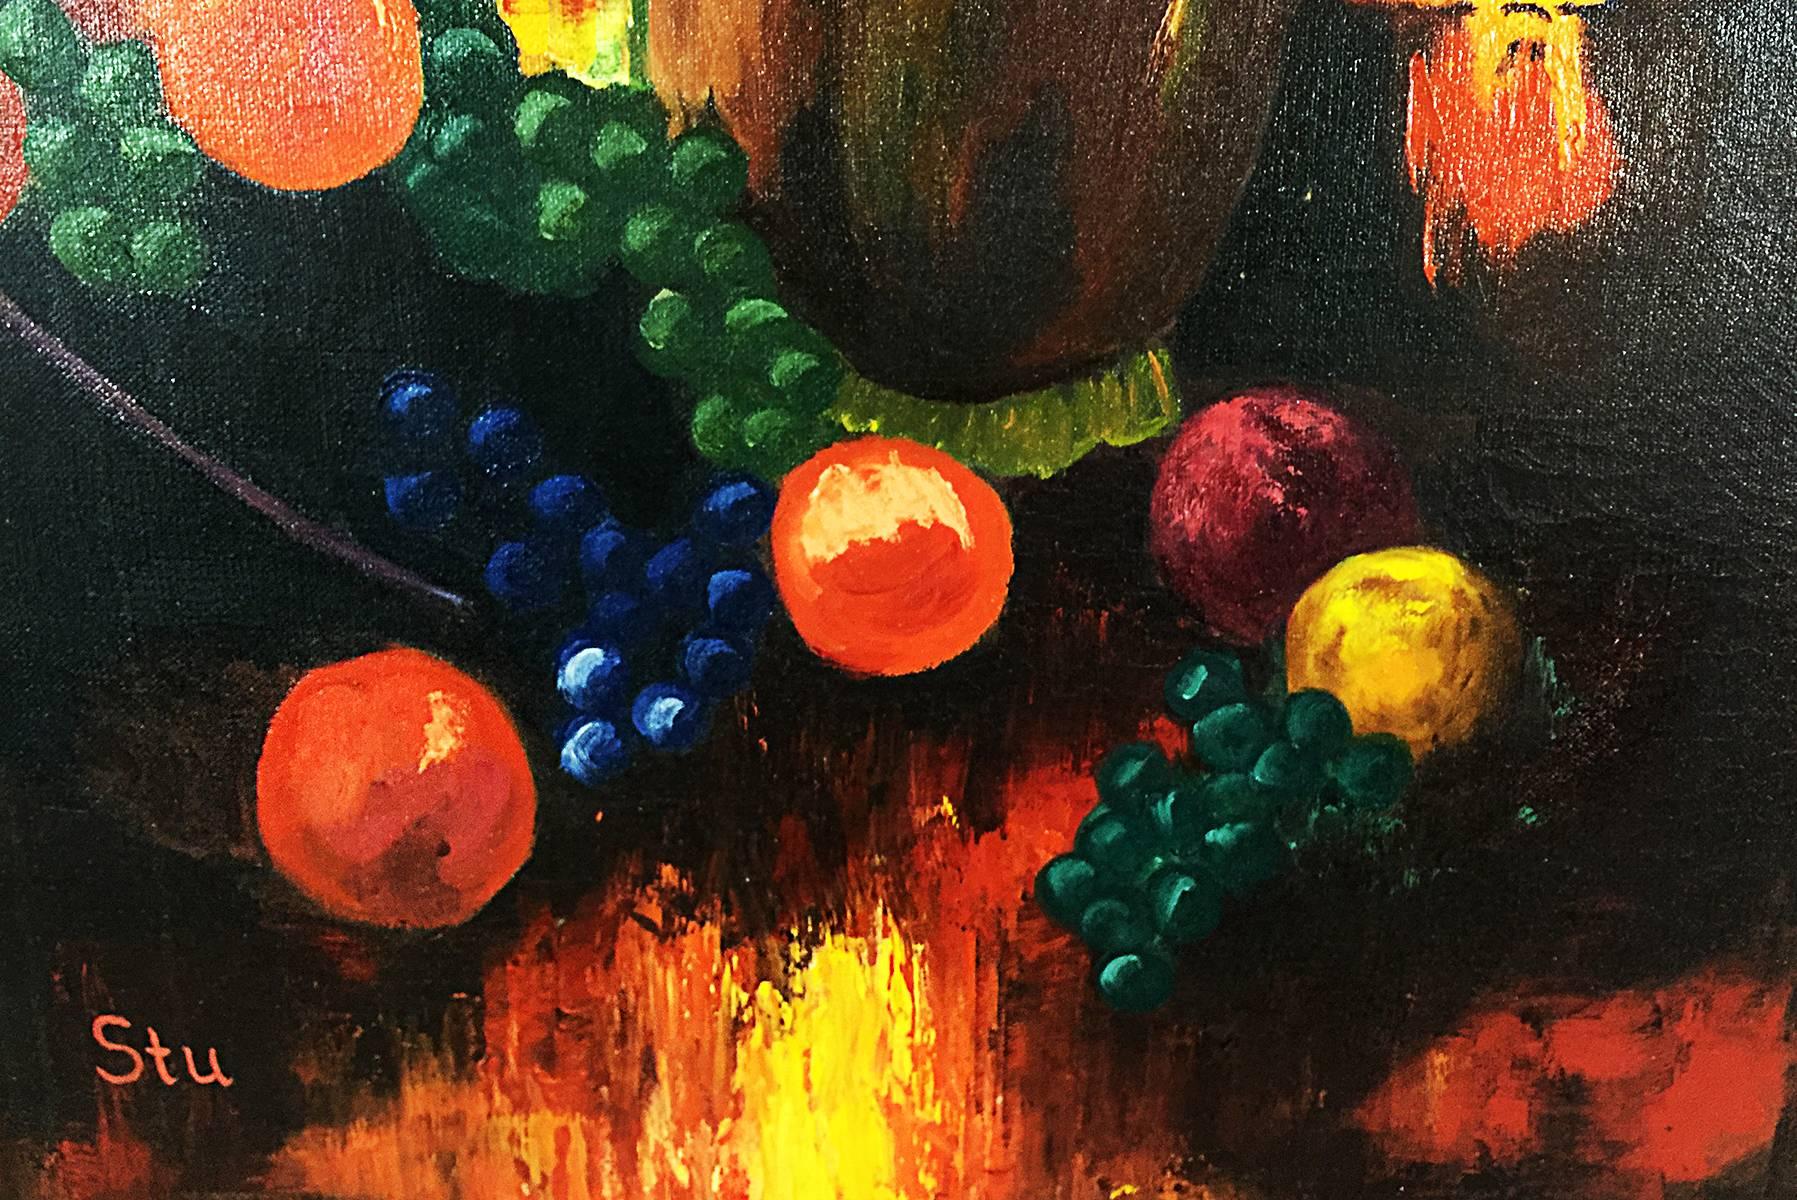 Groovy amateurish still life oil painting by Stu. Very painterly with vibrant colors and hand-painted frame from Mexico. Nice mid-century wall decor.
Dimensions: 2